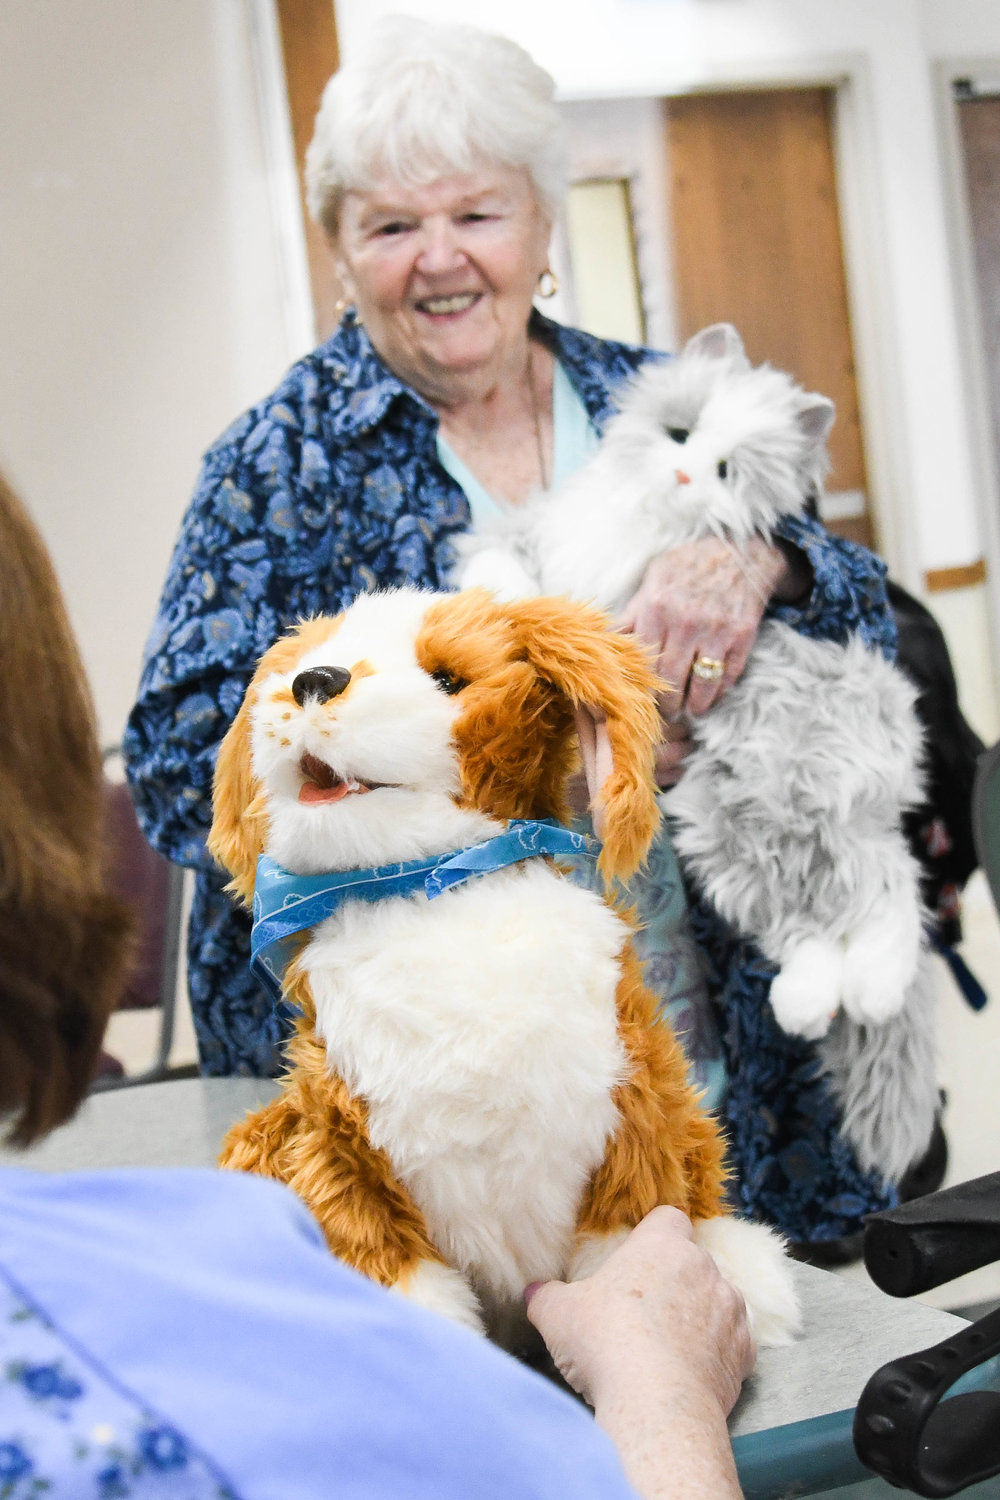 Members of the North Utica Senior Citizens Community Center hold animatronic animals on Friday. The center has received a grant from The Mele Family Fund and The Community Foundation of Herkimer and Oneida County to help battle loneliness using robotic pets. The two-pronged approach to mitigating social isolation, loneliness, and cognitive decline will include the animatronic pets and the promotion of social interaction using technology.